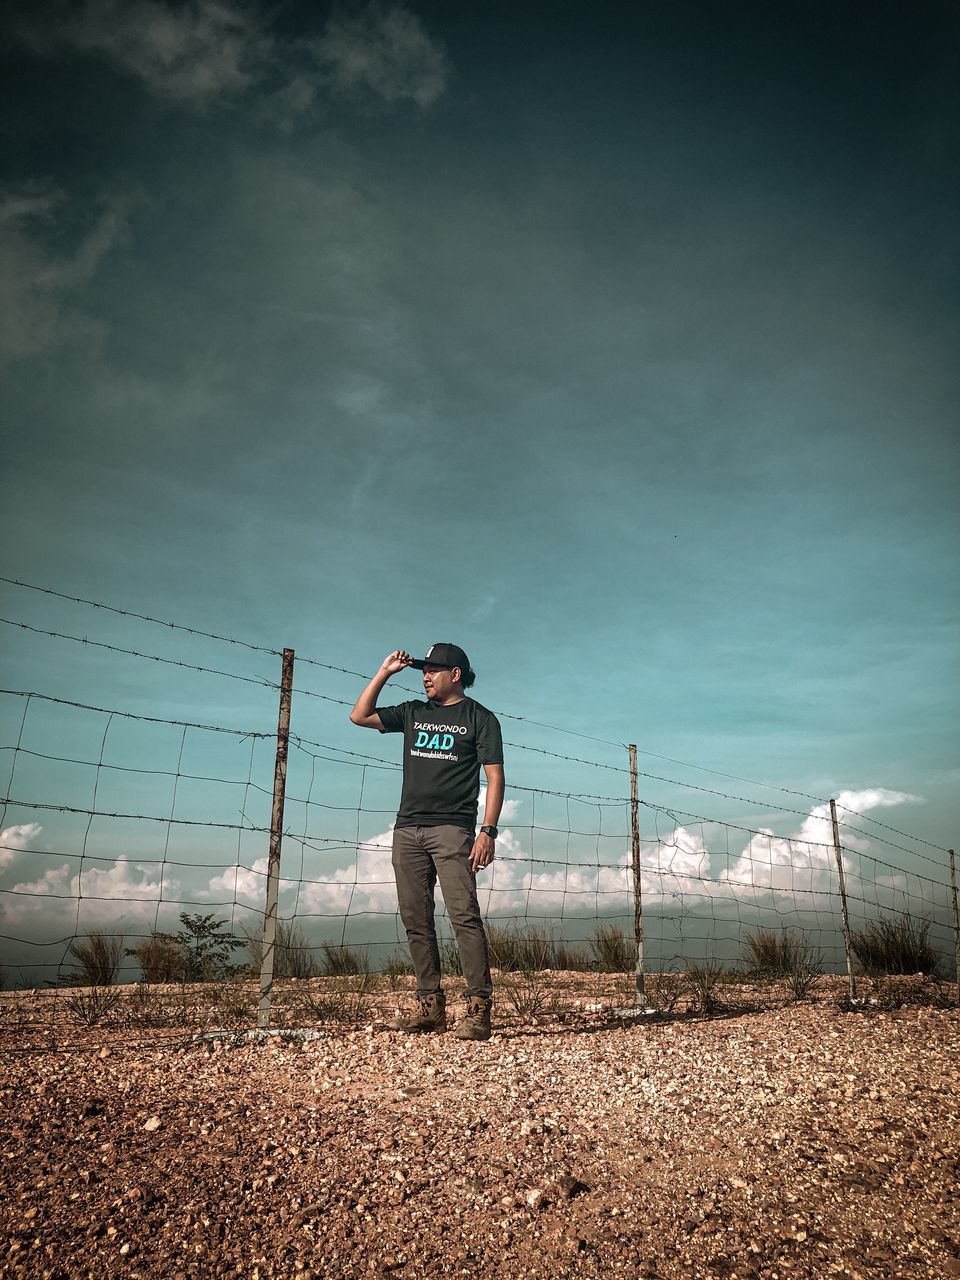 one person, sky, full length, standing, nature, horizon, cloud, sports, sunlight, adult, fence, young adult, blue, morning, copy space, person, casual clothing, land, men, outdoors, lifestyles, day, leisure activity, sea, environment, clothing, light